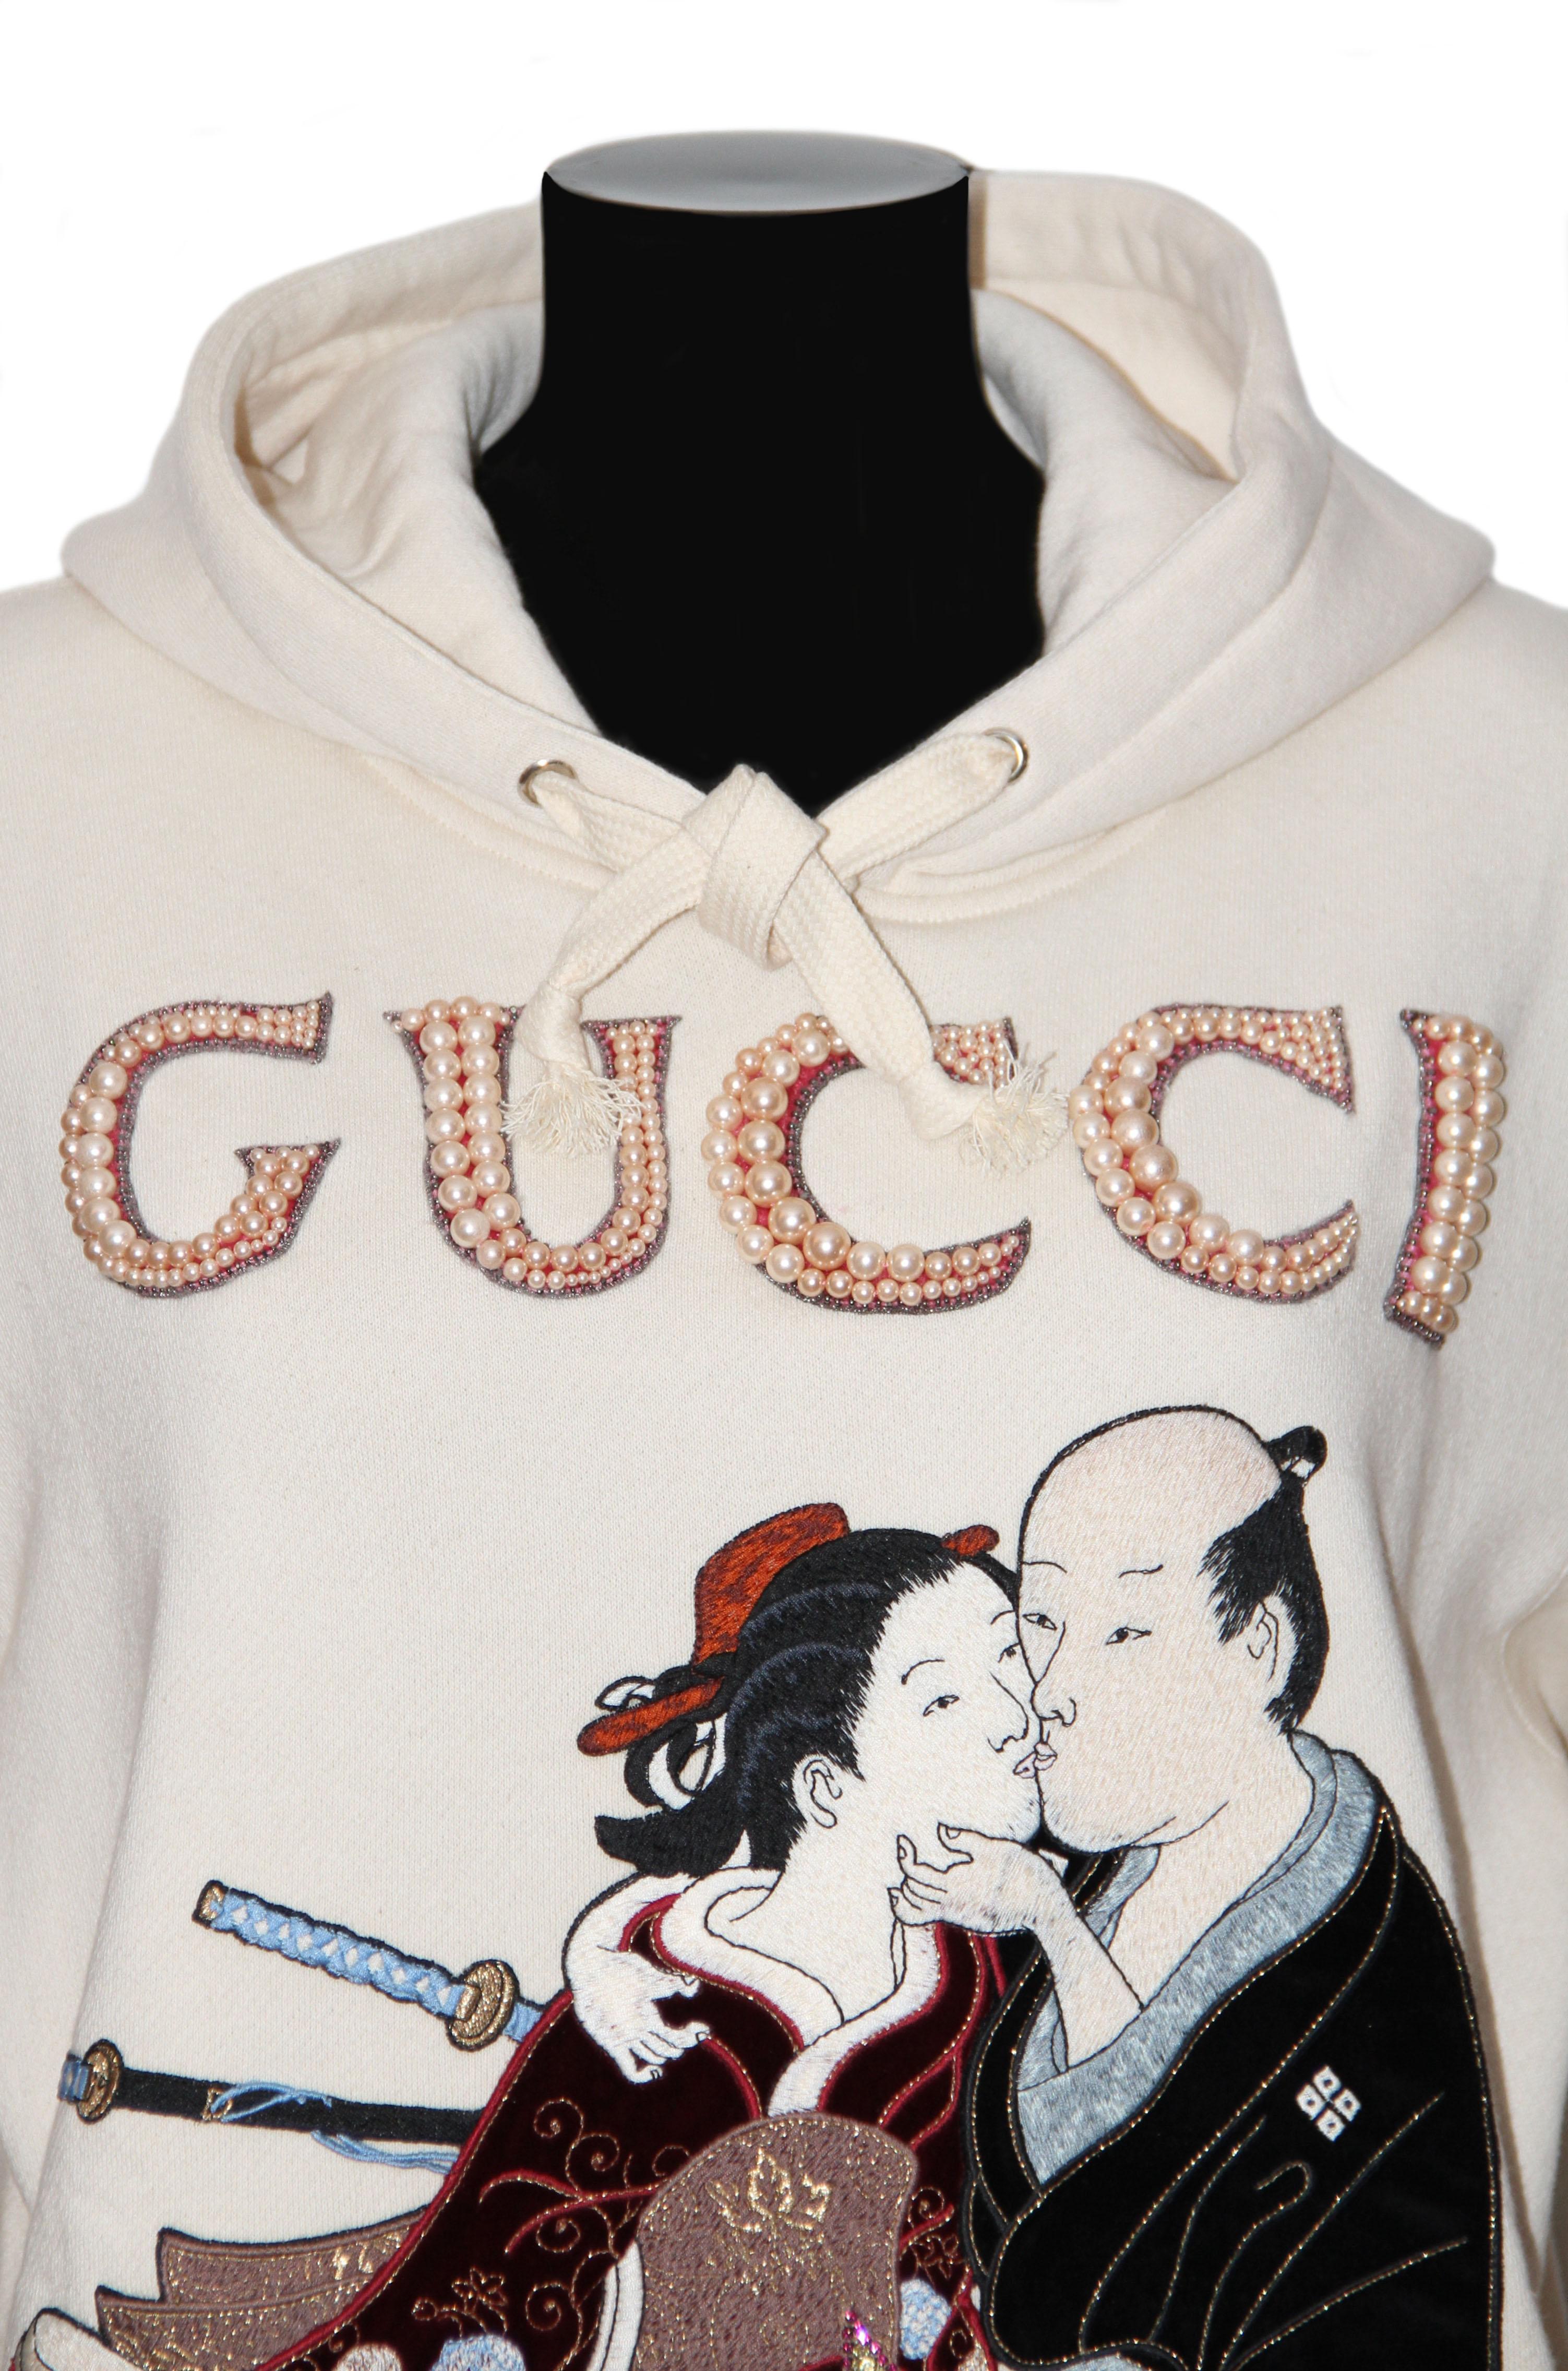 The Shunga sweatshirt was unveiled in Milan in the Gucci Hub. 
Alessandro Michele, the italian artistic director of the house of Gucci since 2015 is very influenced by art and as a result he mixes Italian baroque and Japanese prints. 
The Shunga